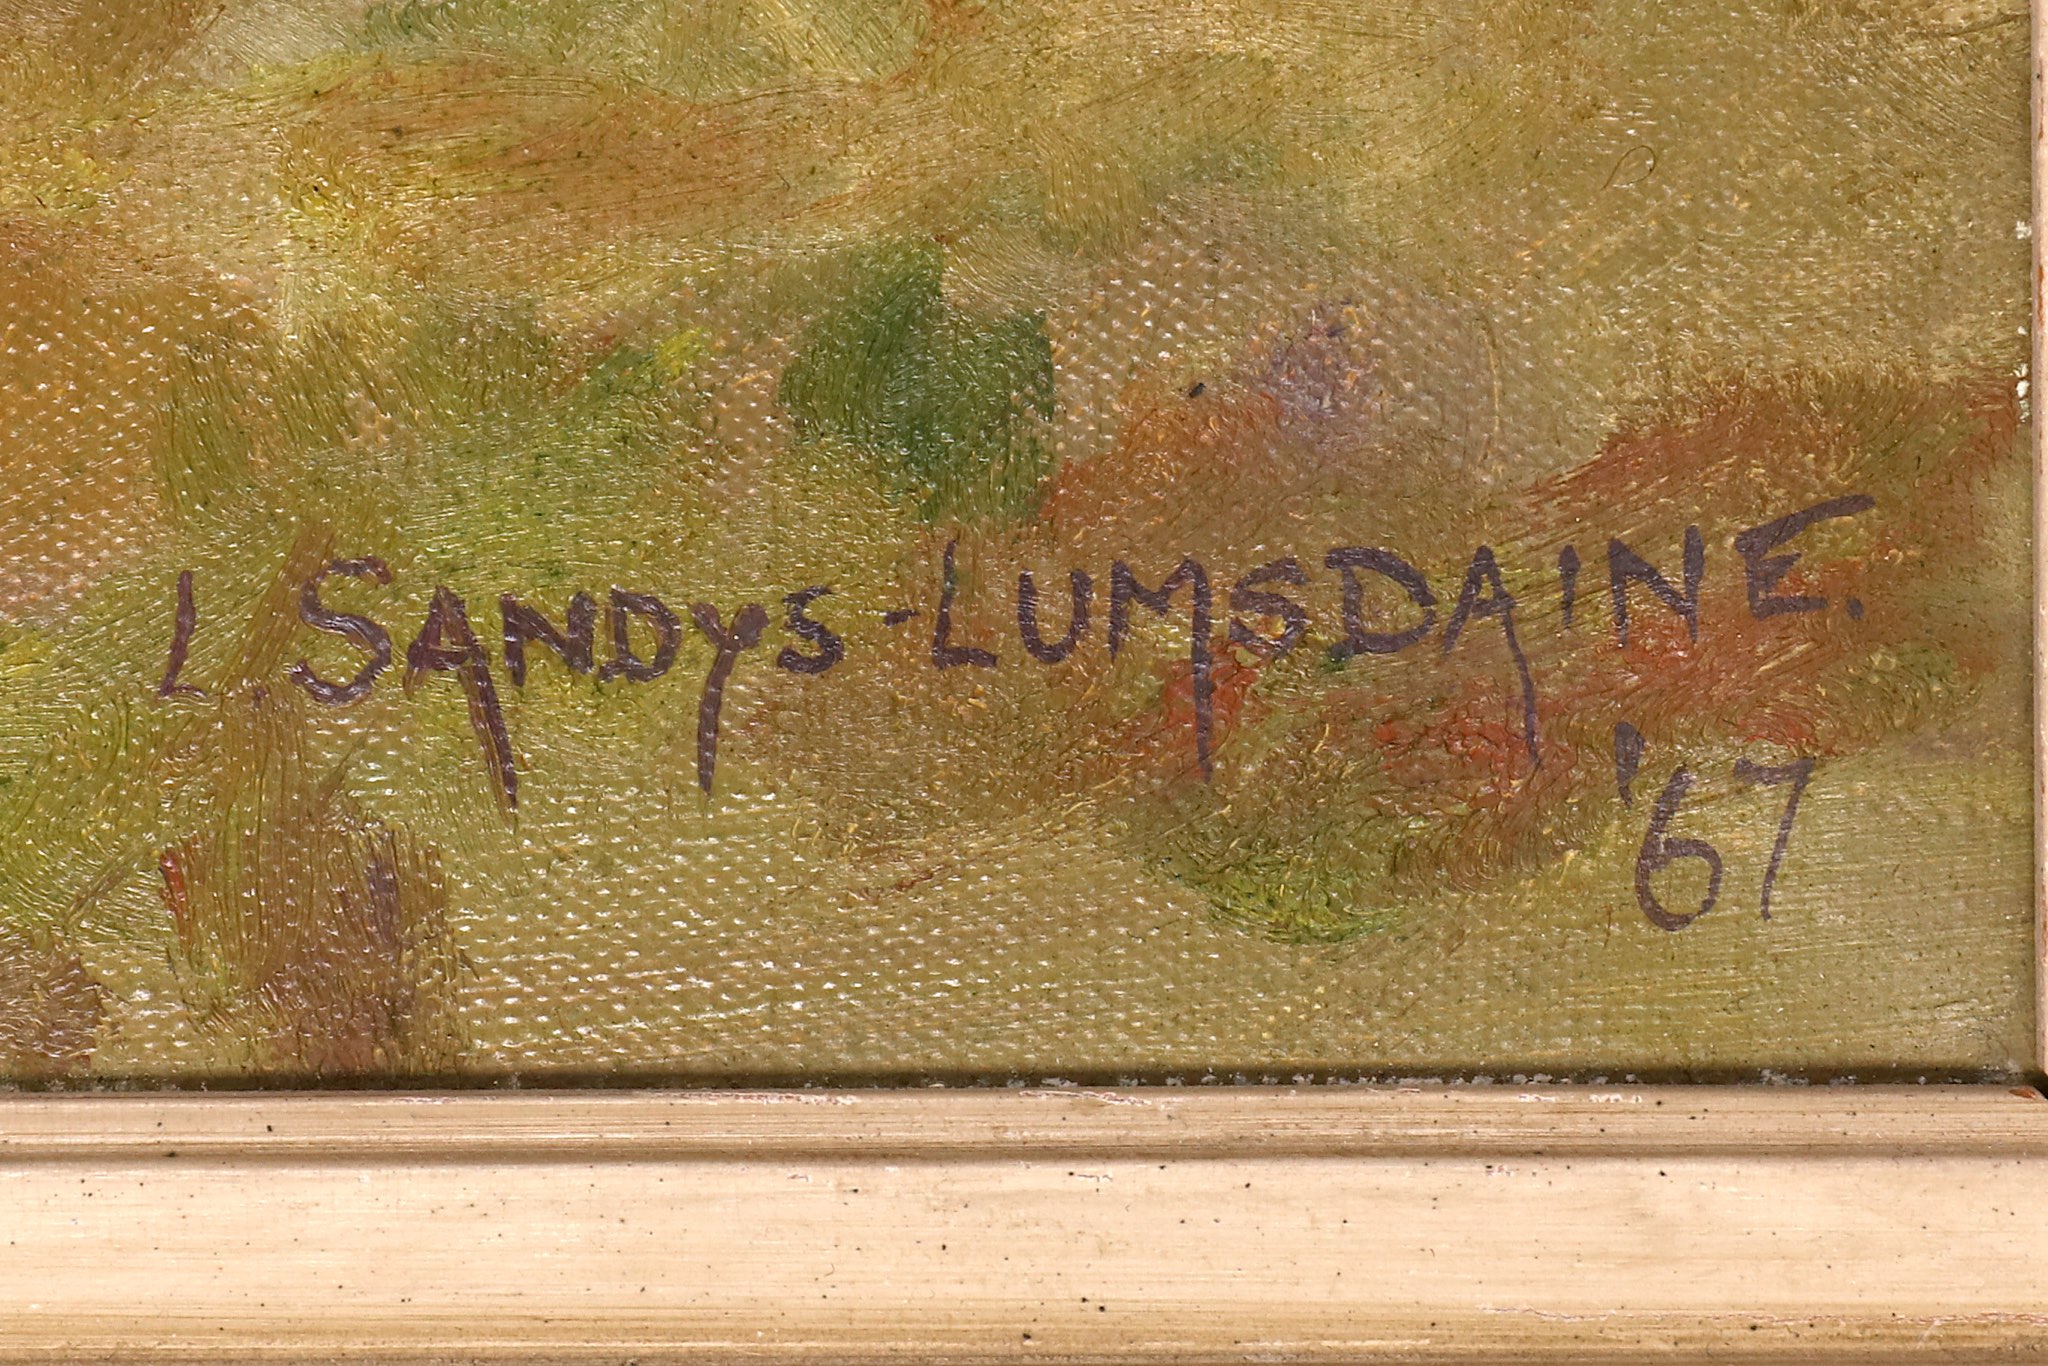 Leesa Sandys Lumsdaine 1936-1980's, 'Cordyn Pumfrey & Peanuts' 1967, portrait of horse and sitter in - Image 2 of 3